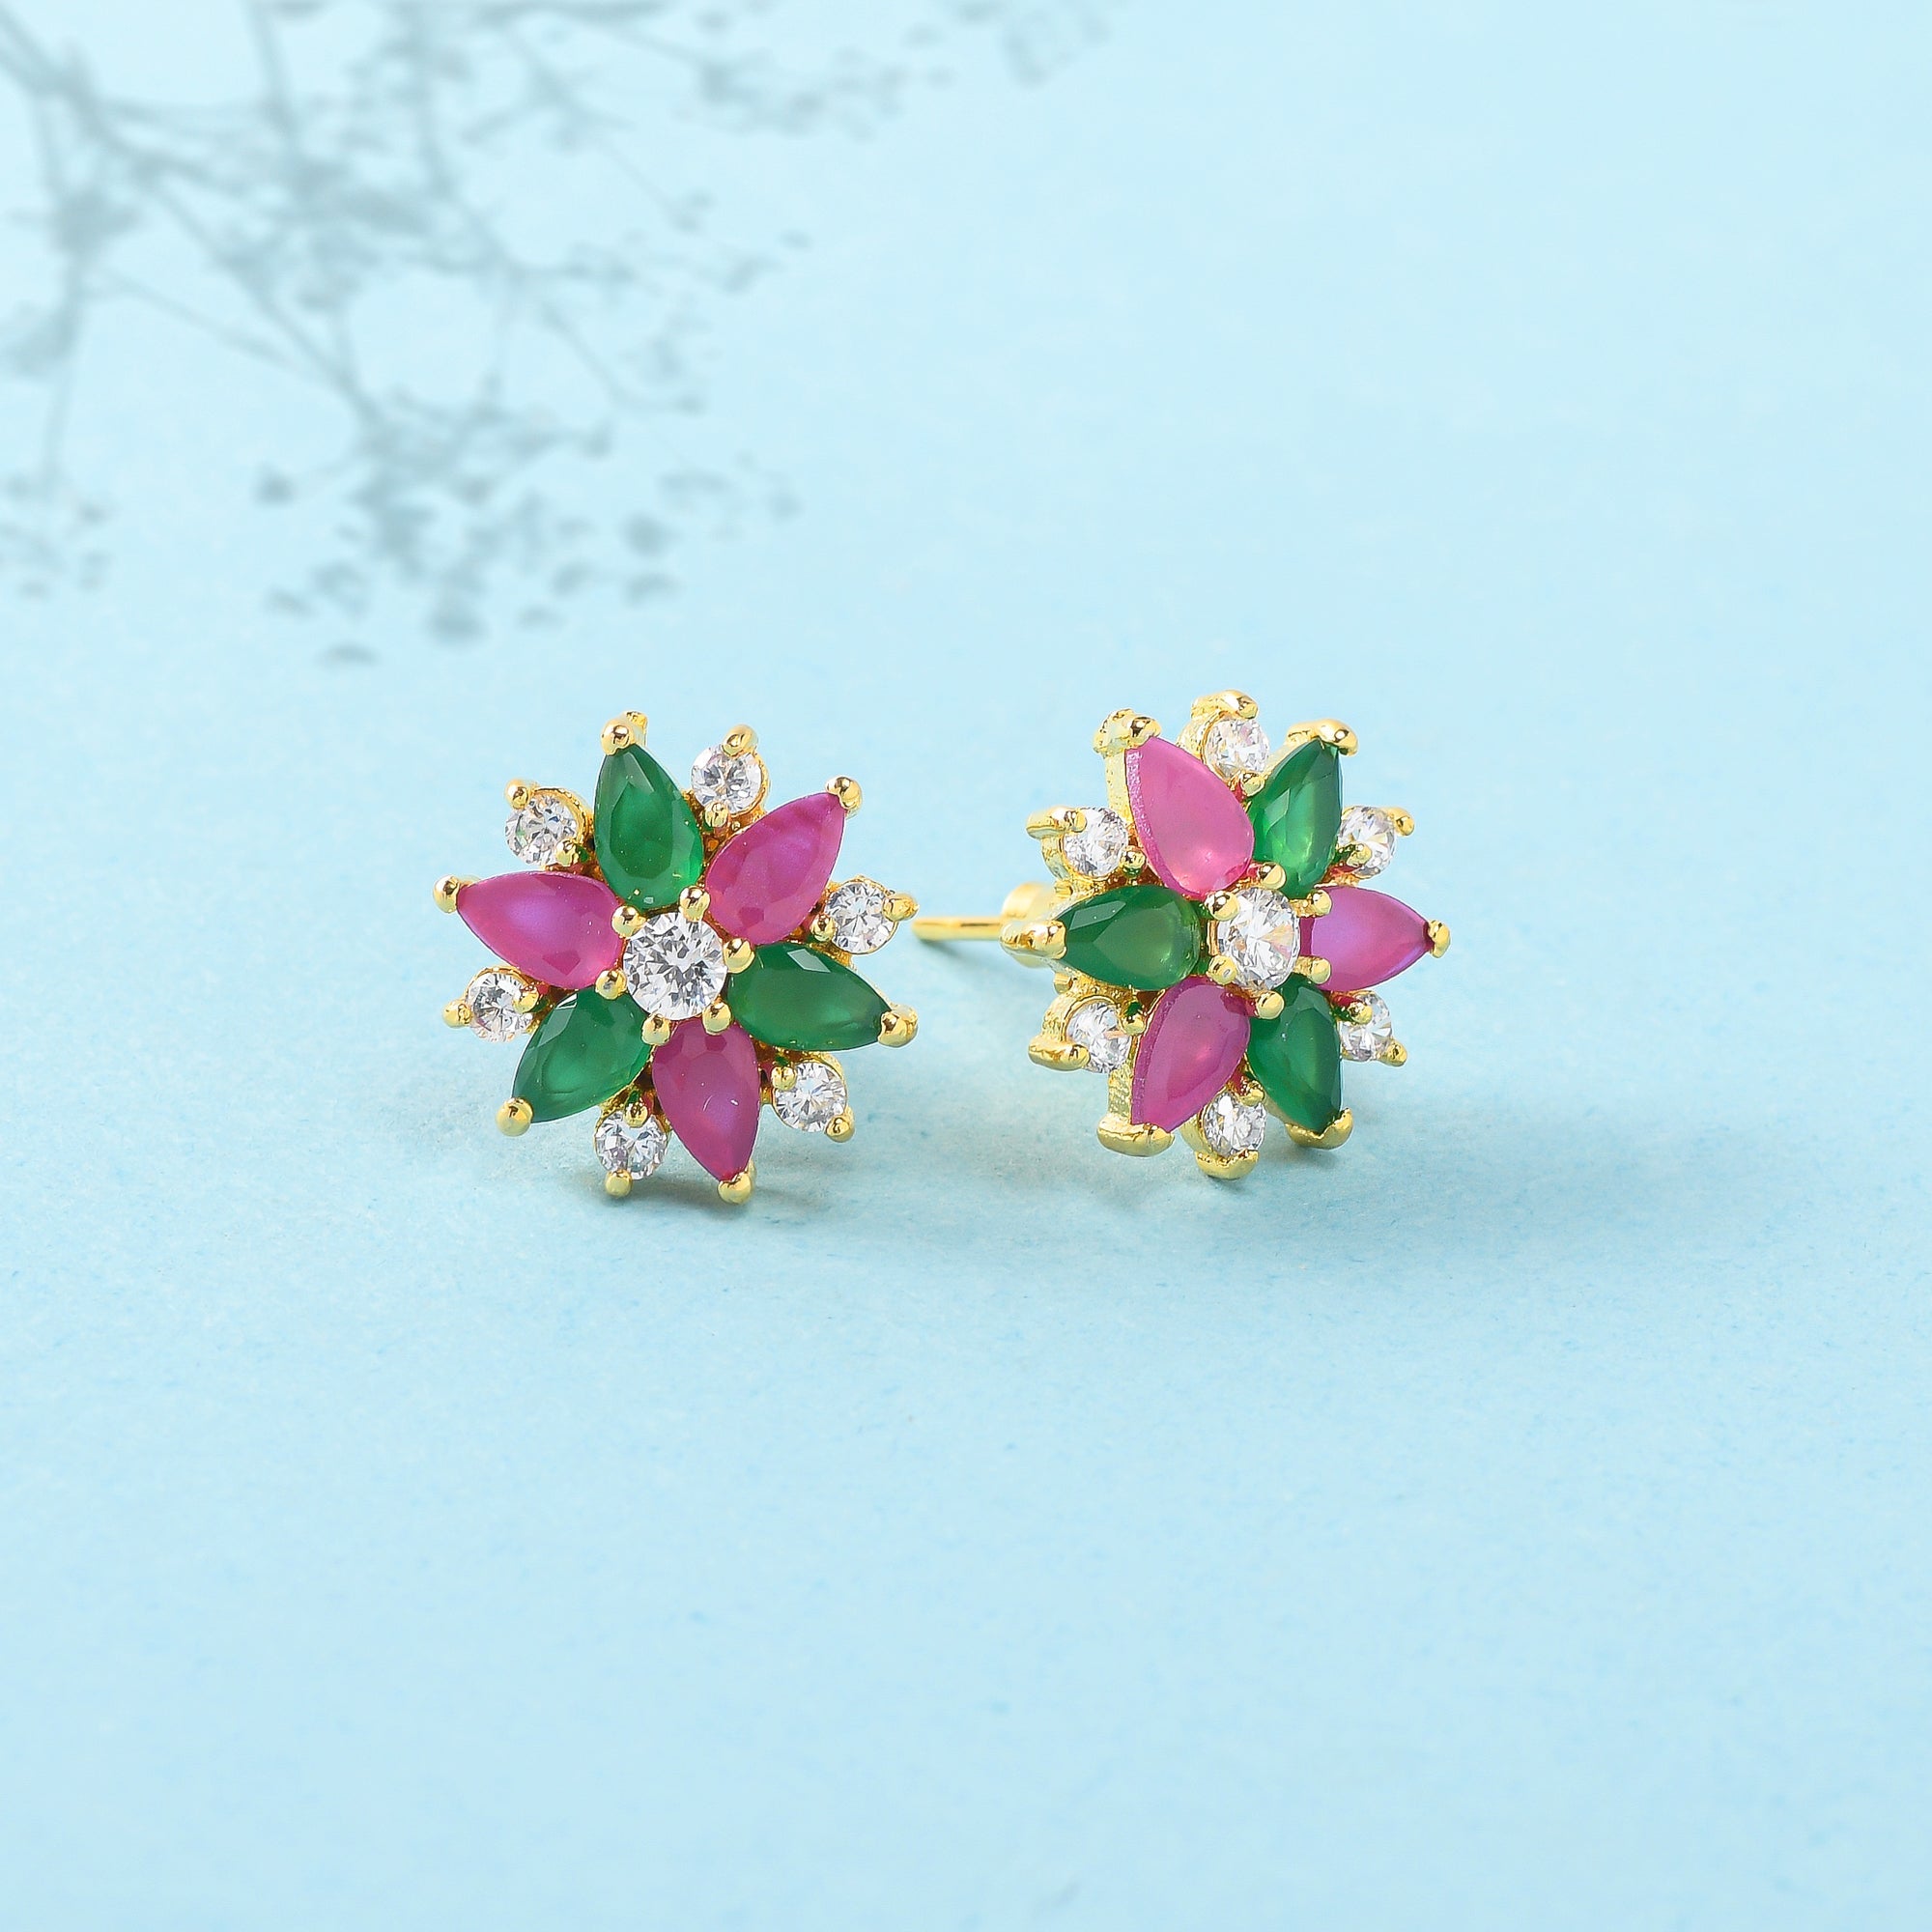 Women's White And Coloured Cz Gems Stud Earrings - Voylla